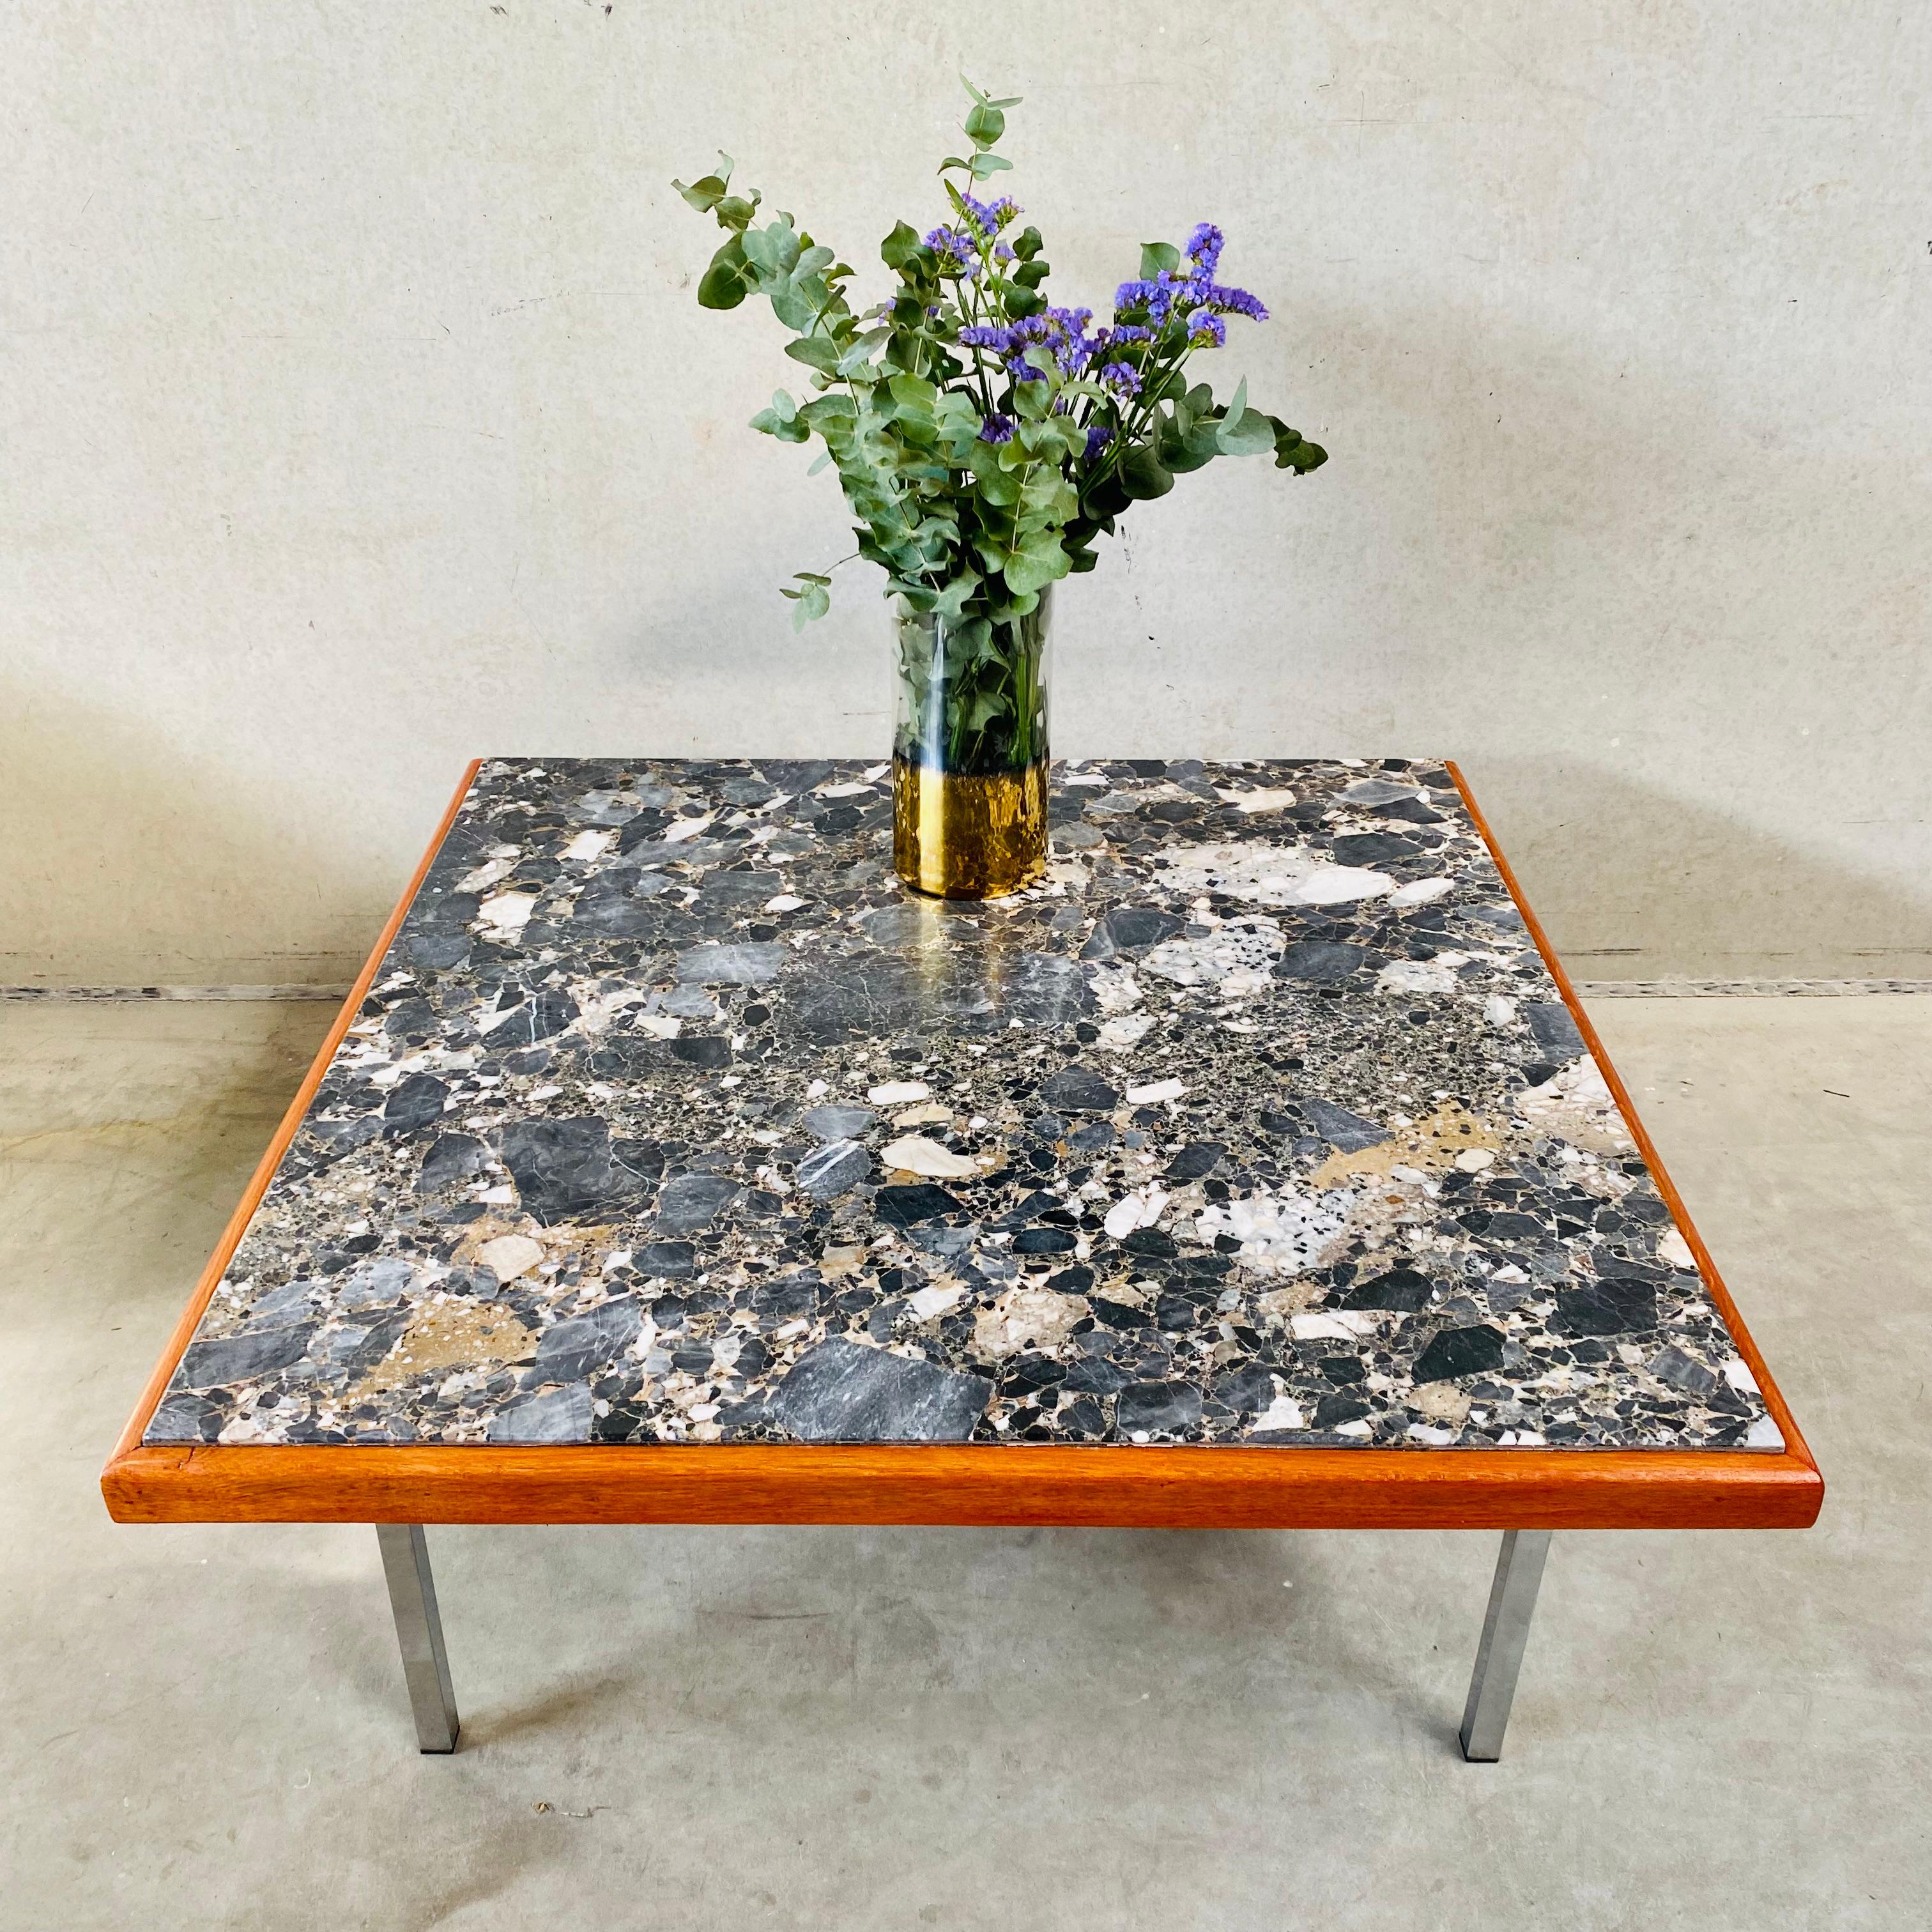 Elegant Vintage Brutalist Granito Terrazzo Coffee Table with Teak Frame

Discover a true masterpiece of design with our vintage brutalist granito terrazzo coffee table, reminiscent of Erling Viksjø's celebrated 1970 style. Crafted with meticulous